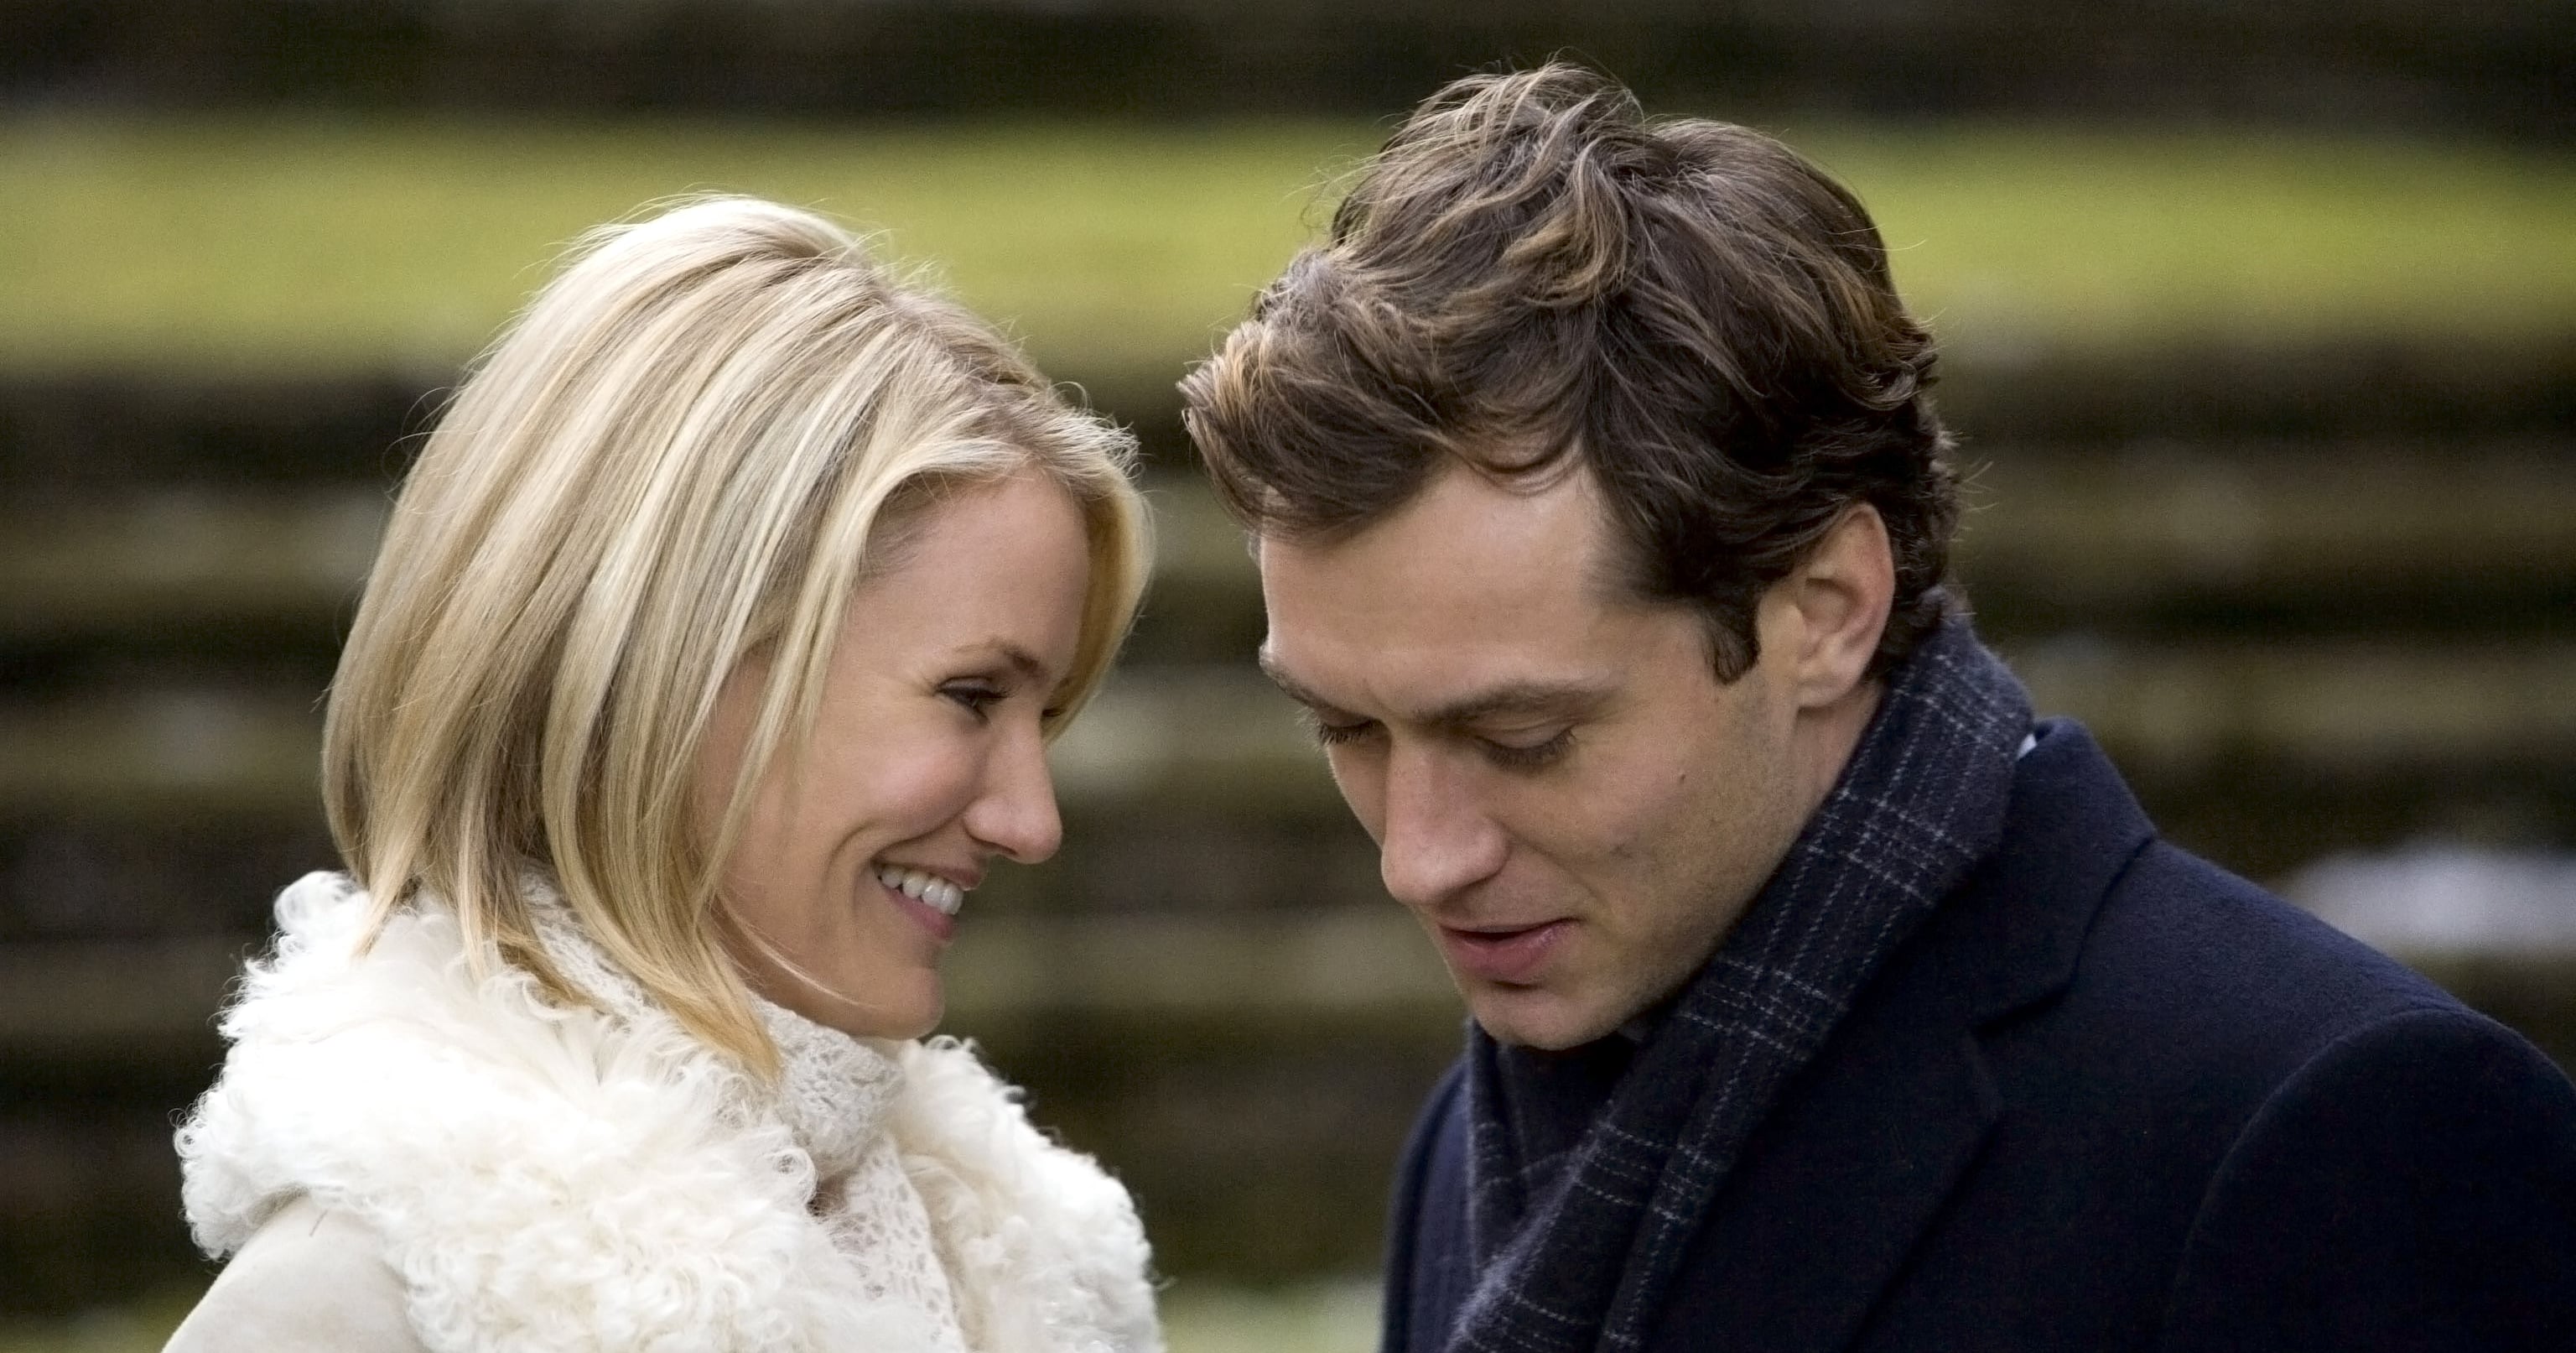 14 Rom-Coms You Can Watch on Hulu Now, From “Just Like Heaven” to “She’s the Man”